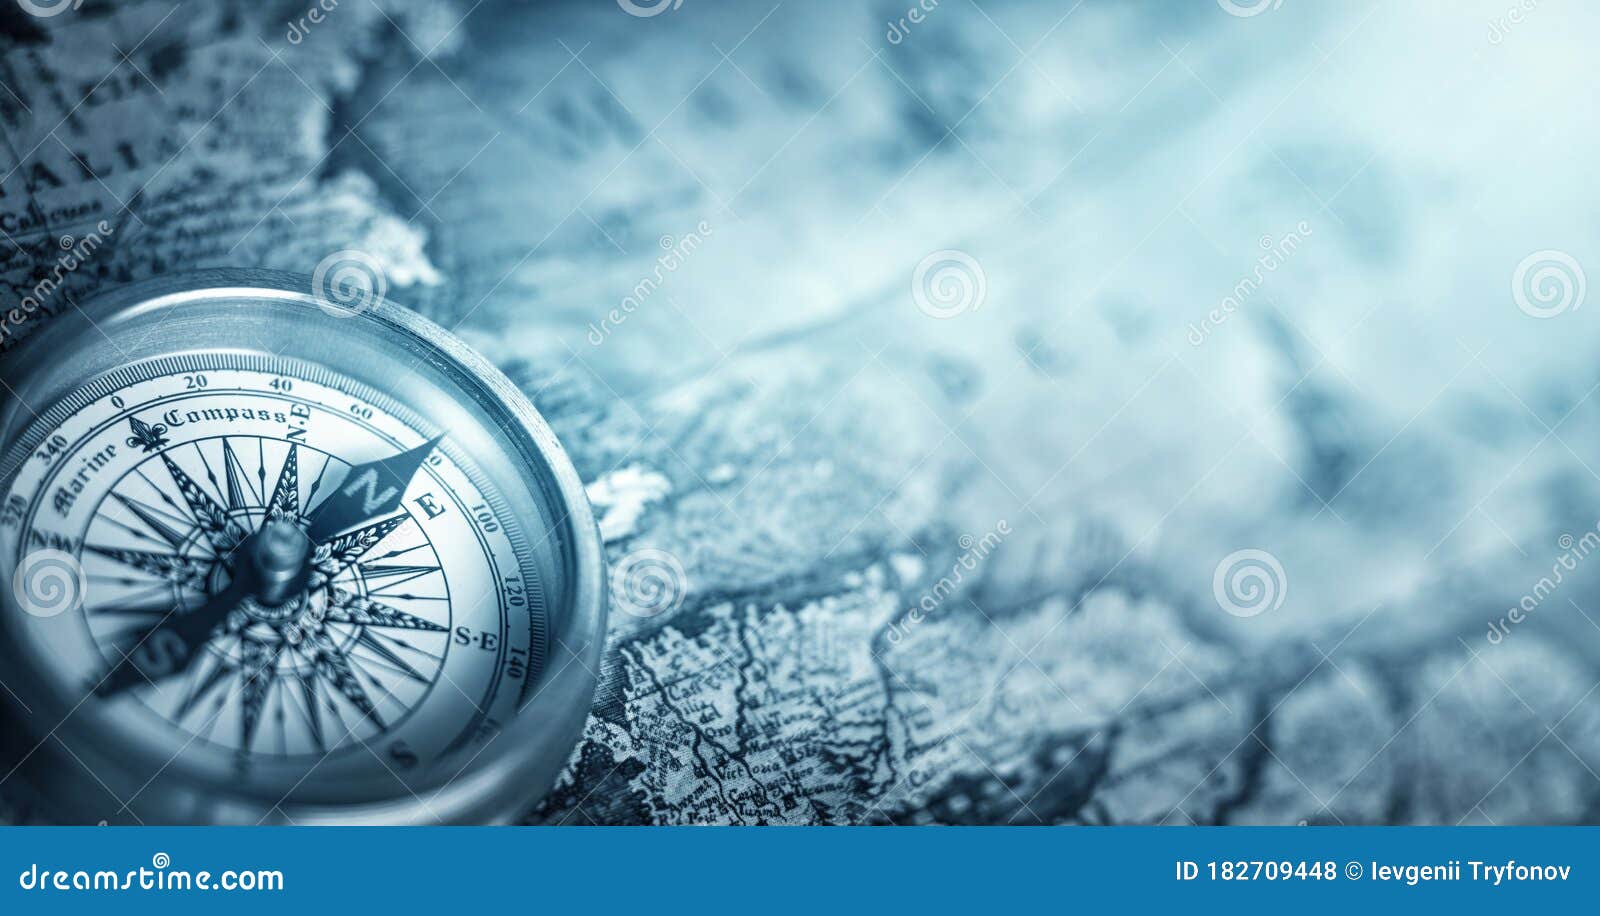 magnetic old compass on world map.travel, geography, navigation, tourism and exploration concept background. macro photo. very